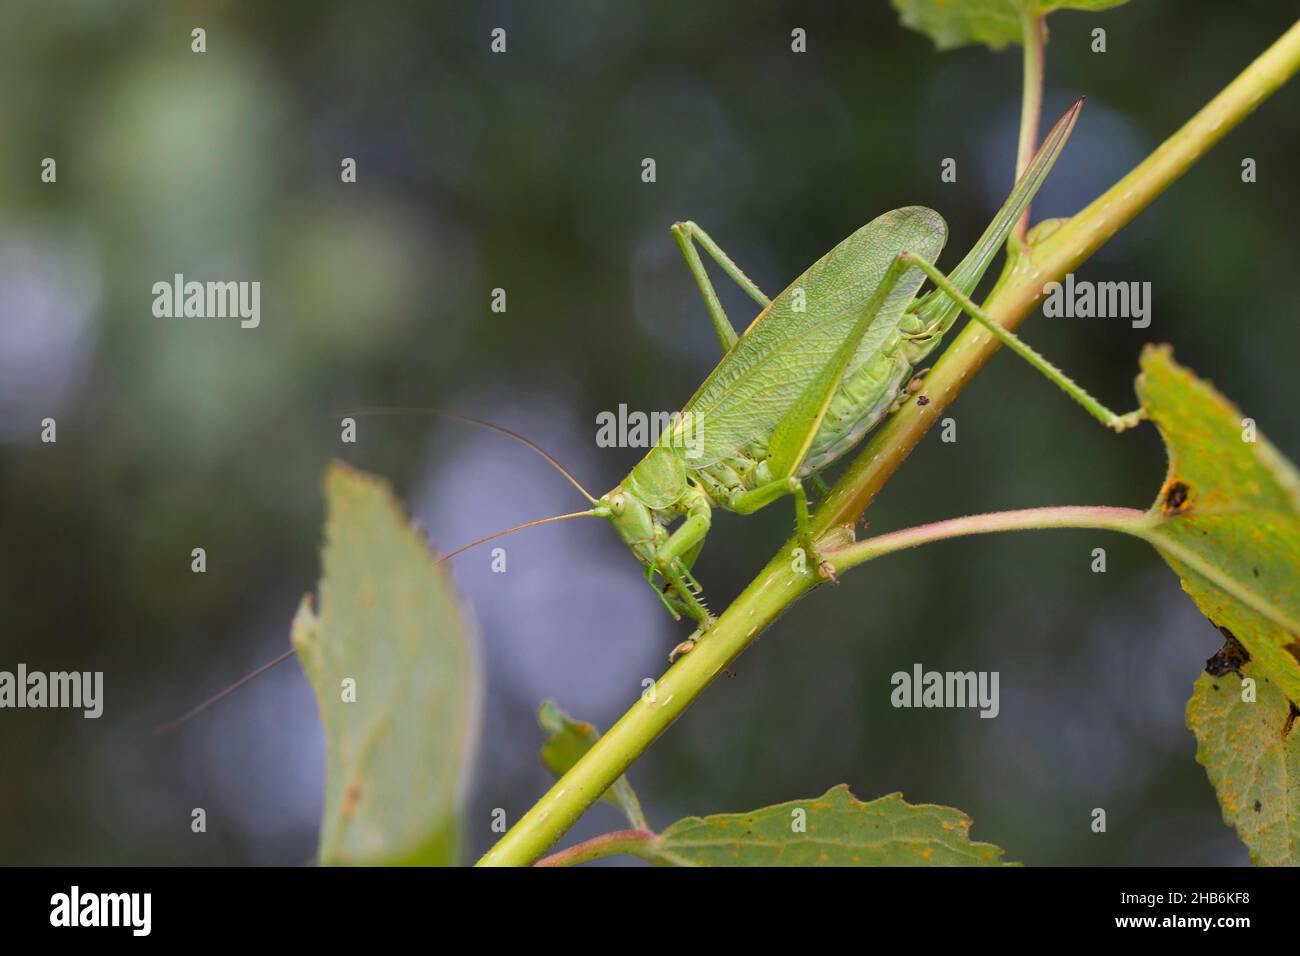 Twitching green bushcricket, Twitching green bush cricket, Twitching green bush-cricket (Tettigonia cantans), female with ovipositor, Germany Stock Photo